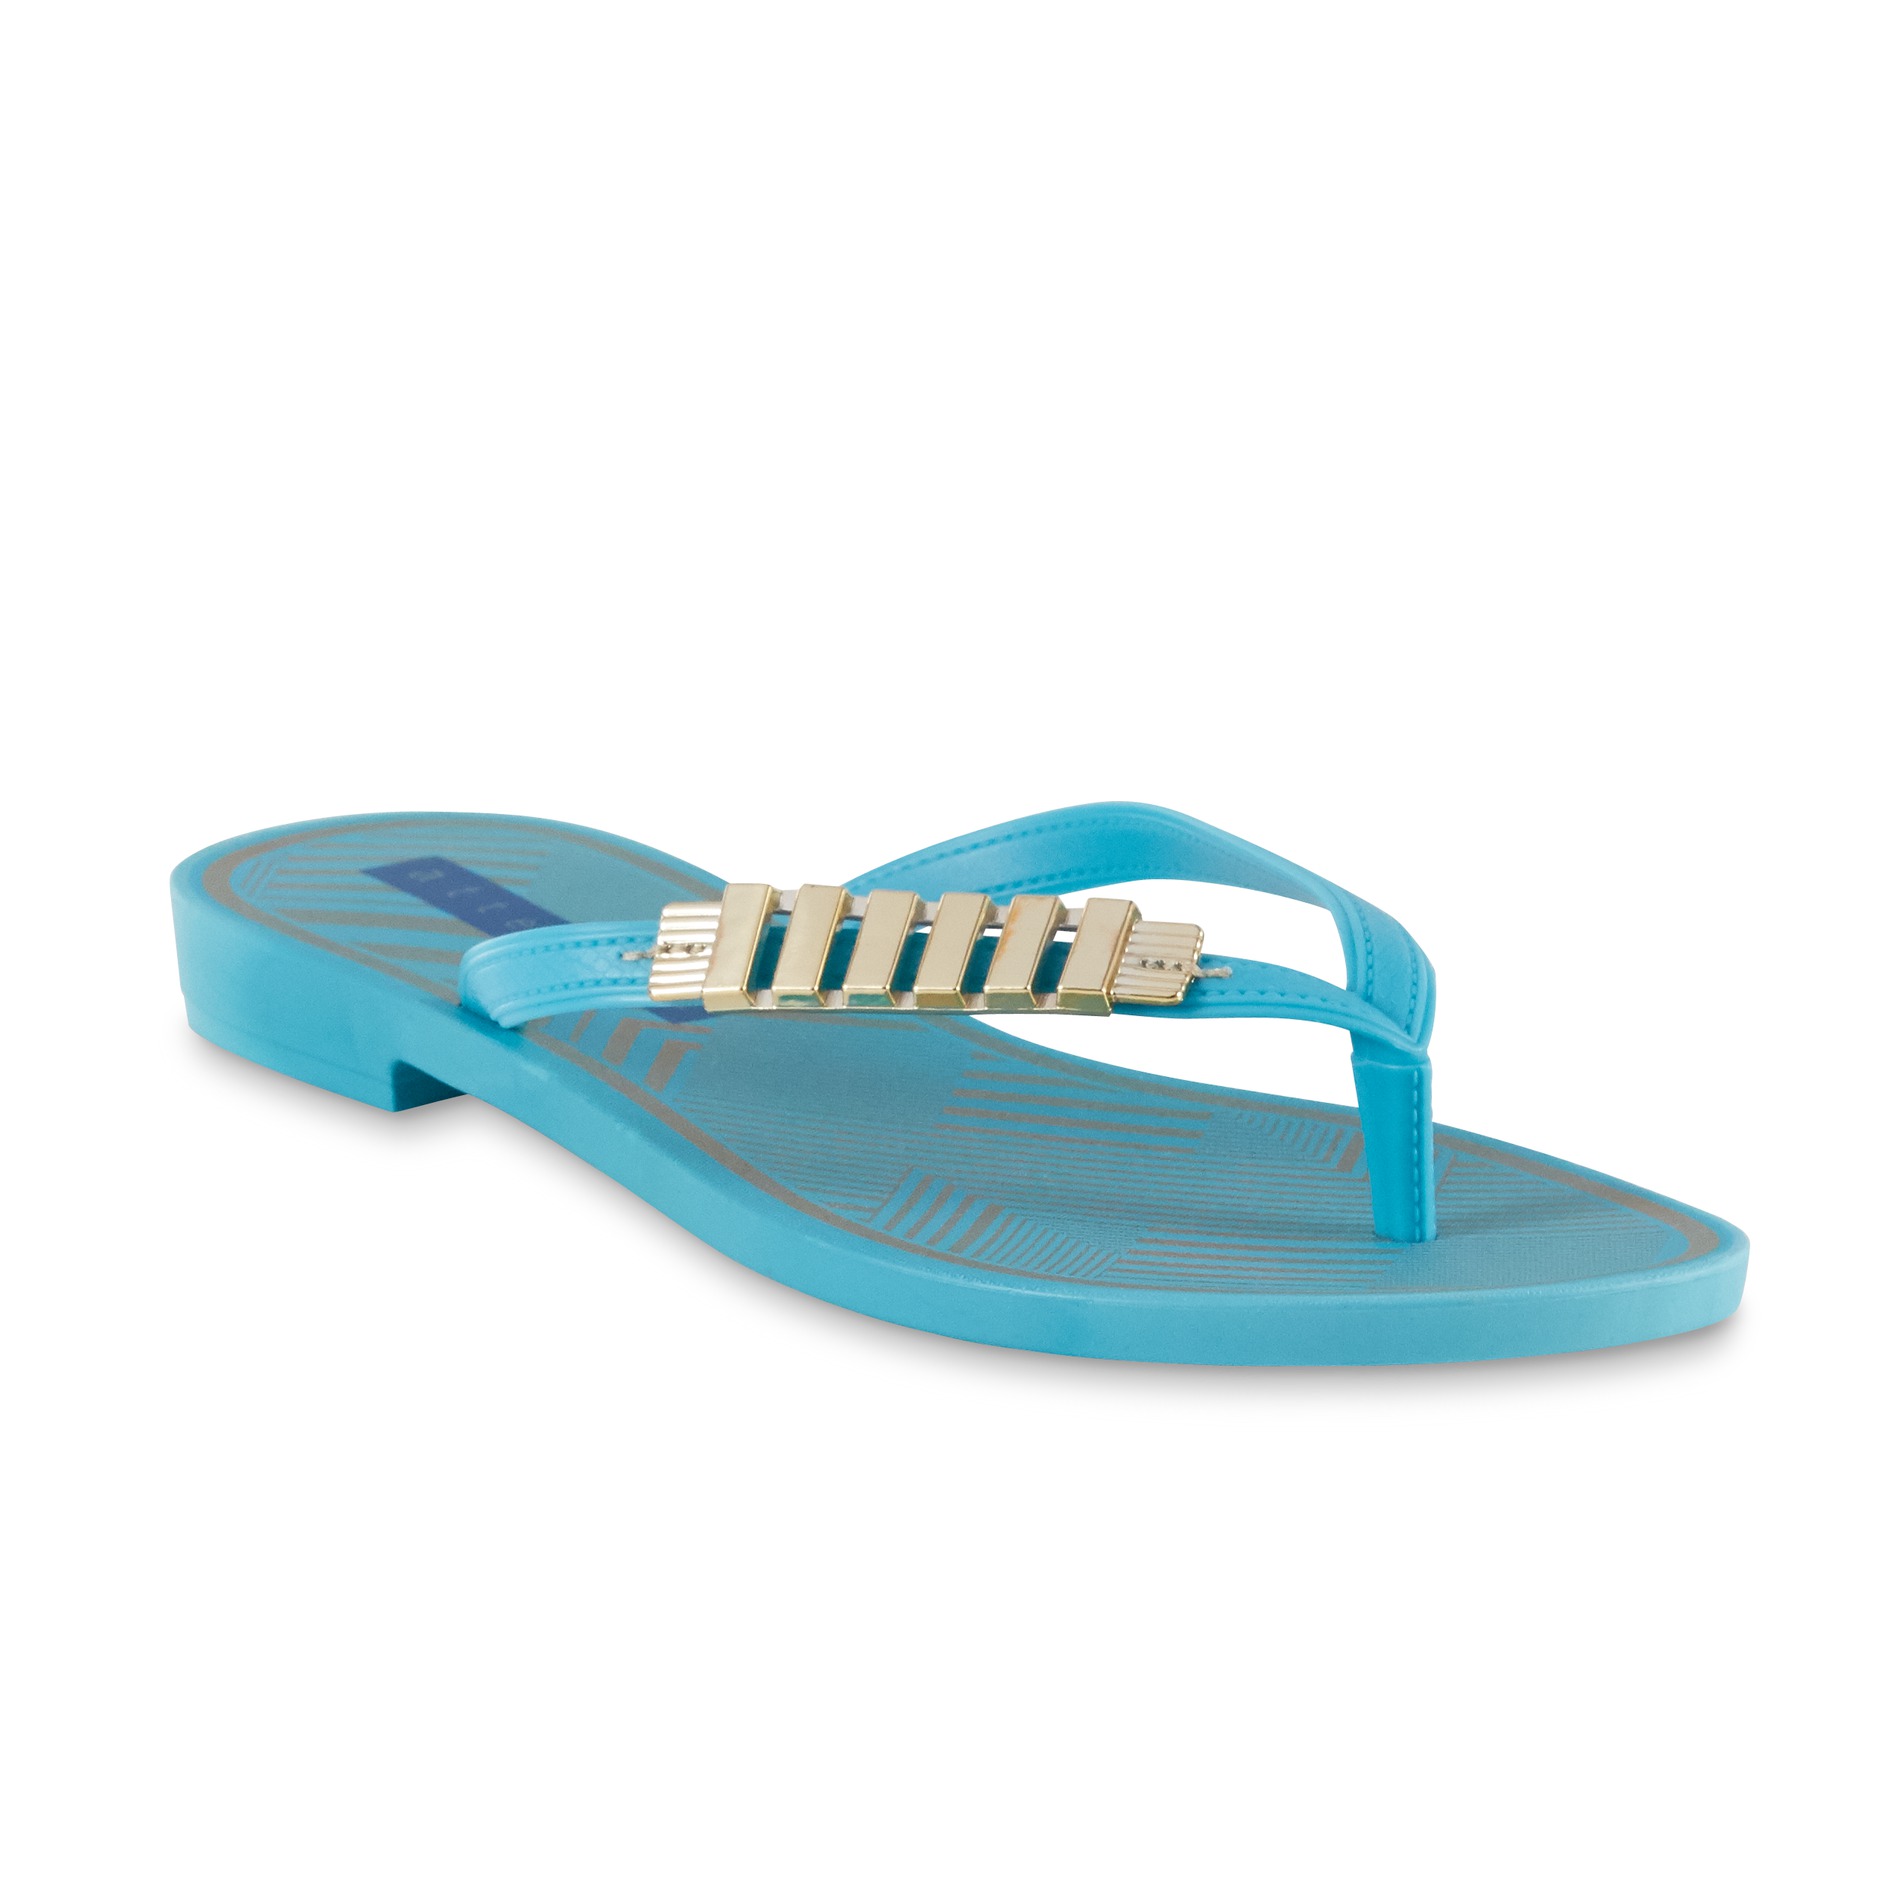 Attention Women's Marnie Turquoise/Gold Flip-Flop